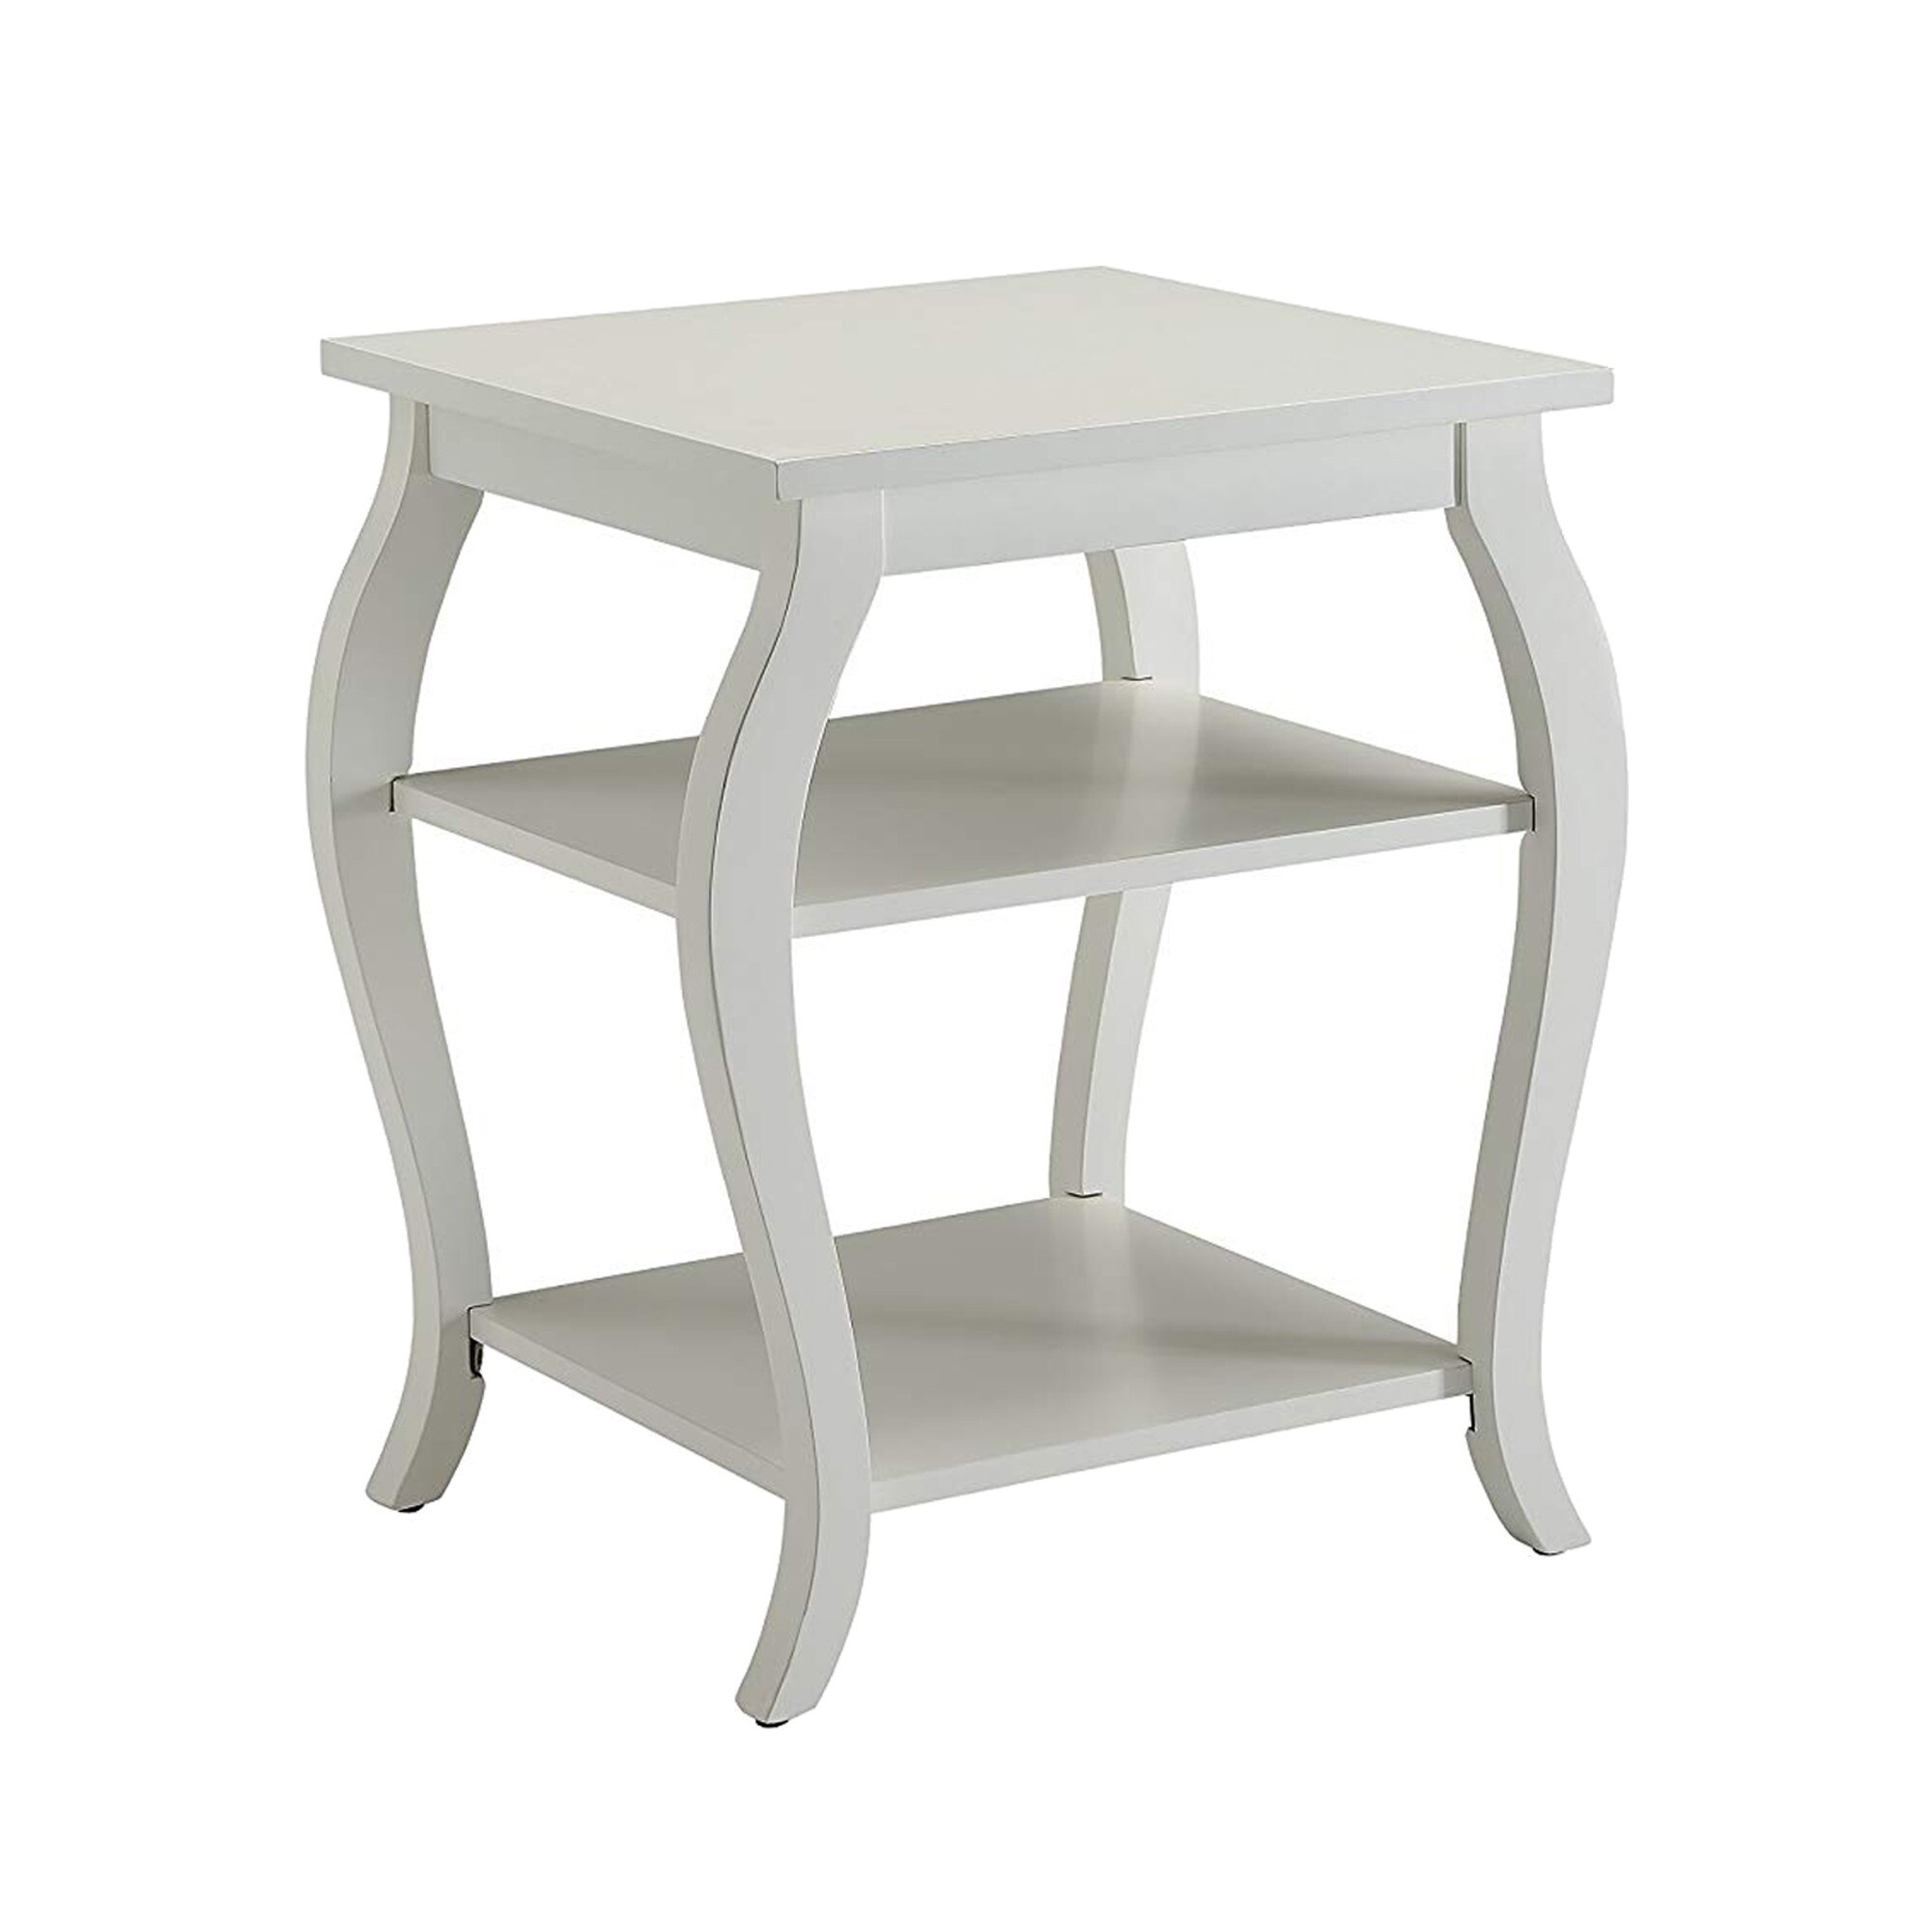 Beautiful End Table - 23 H x 18 W x 20 L Inches